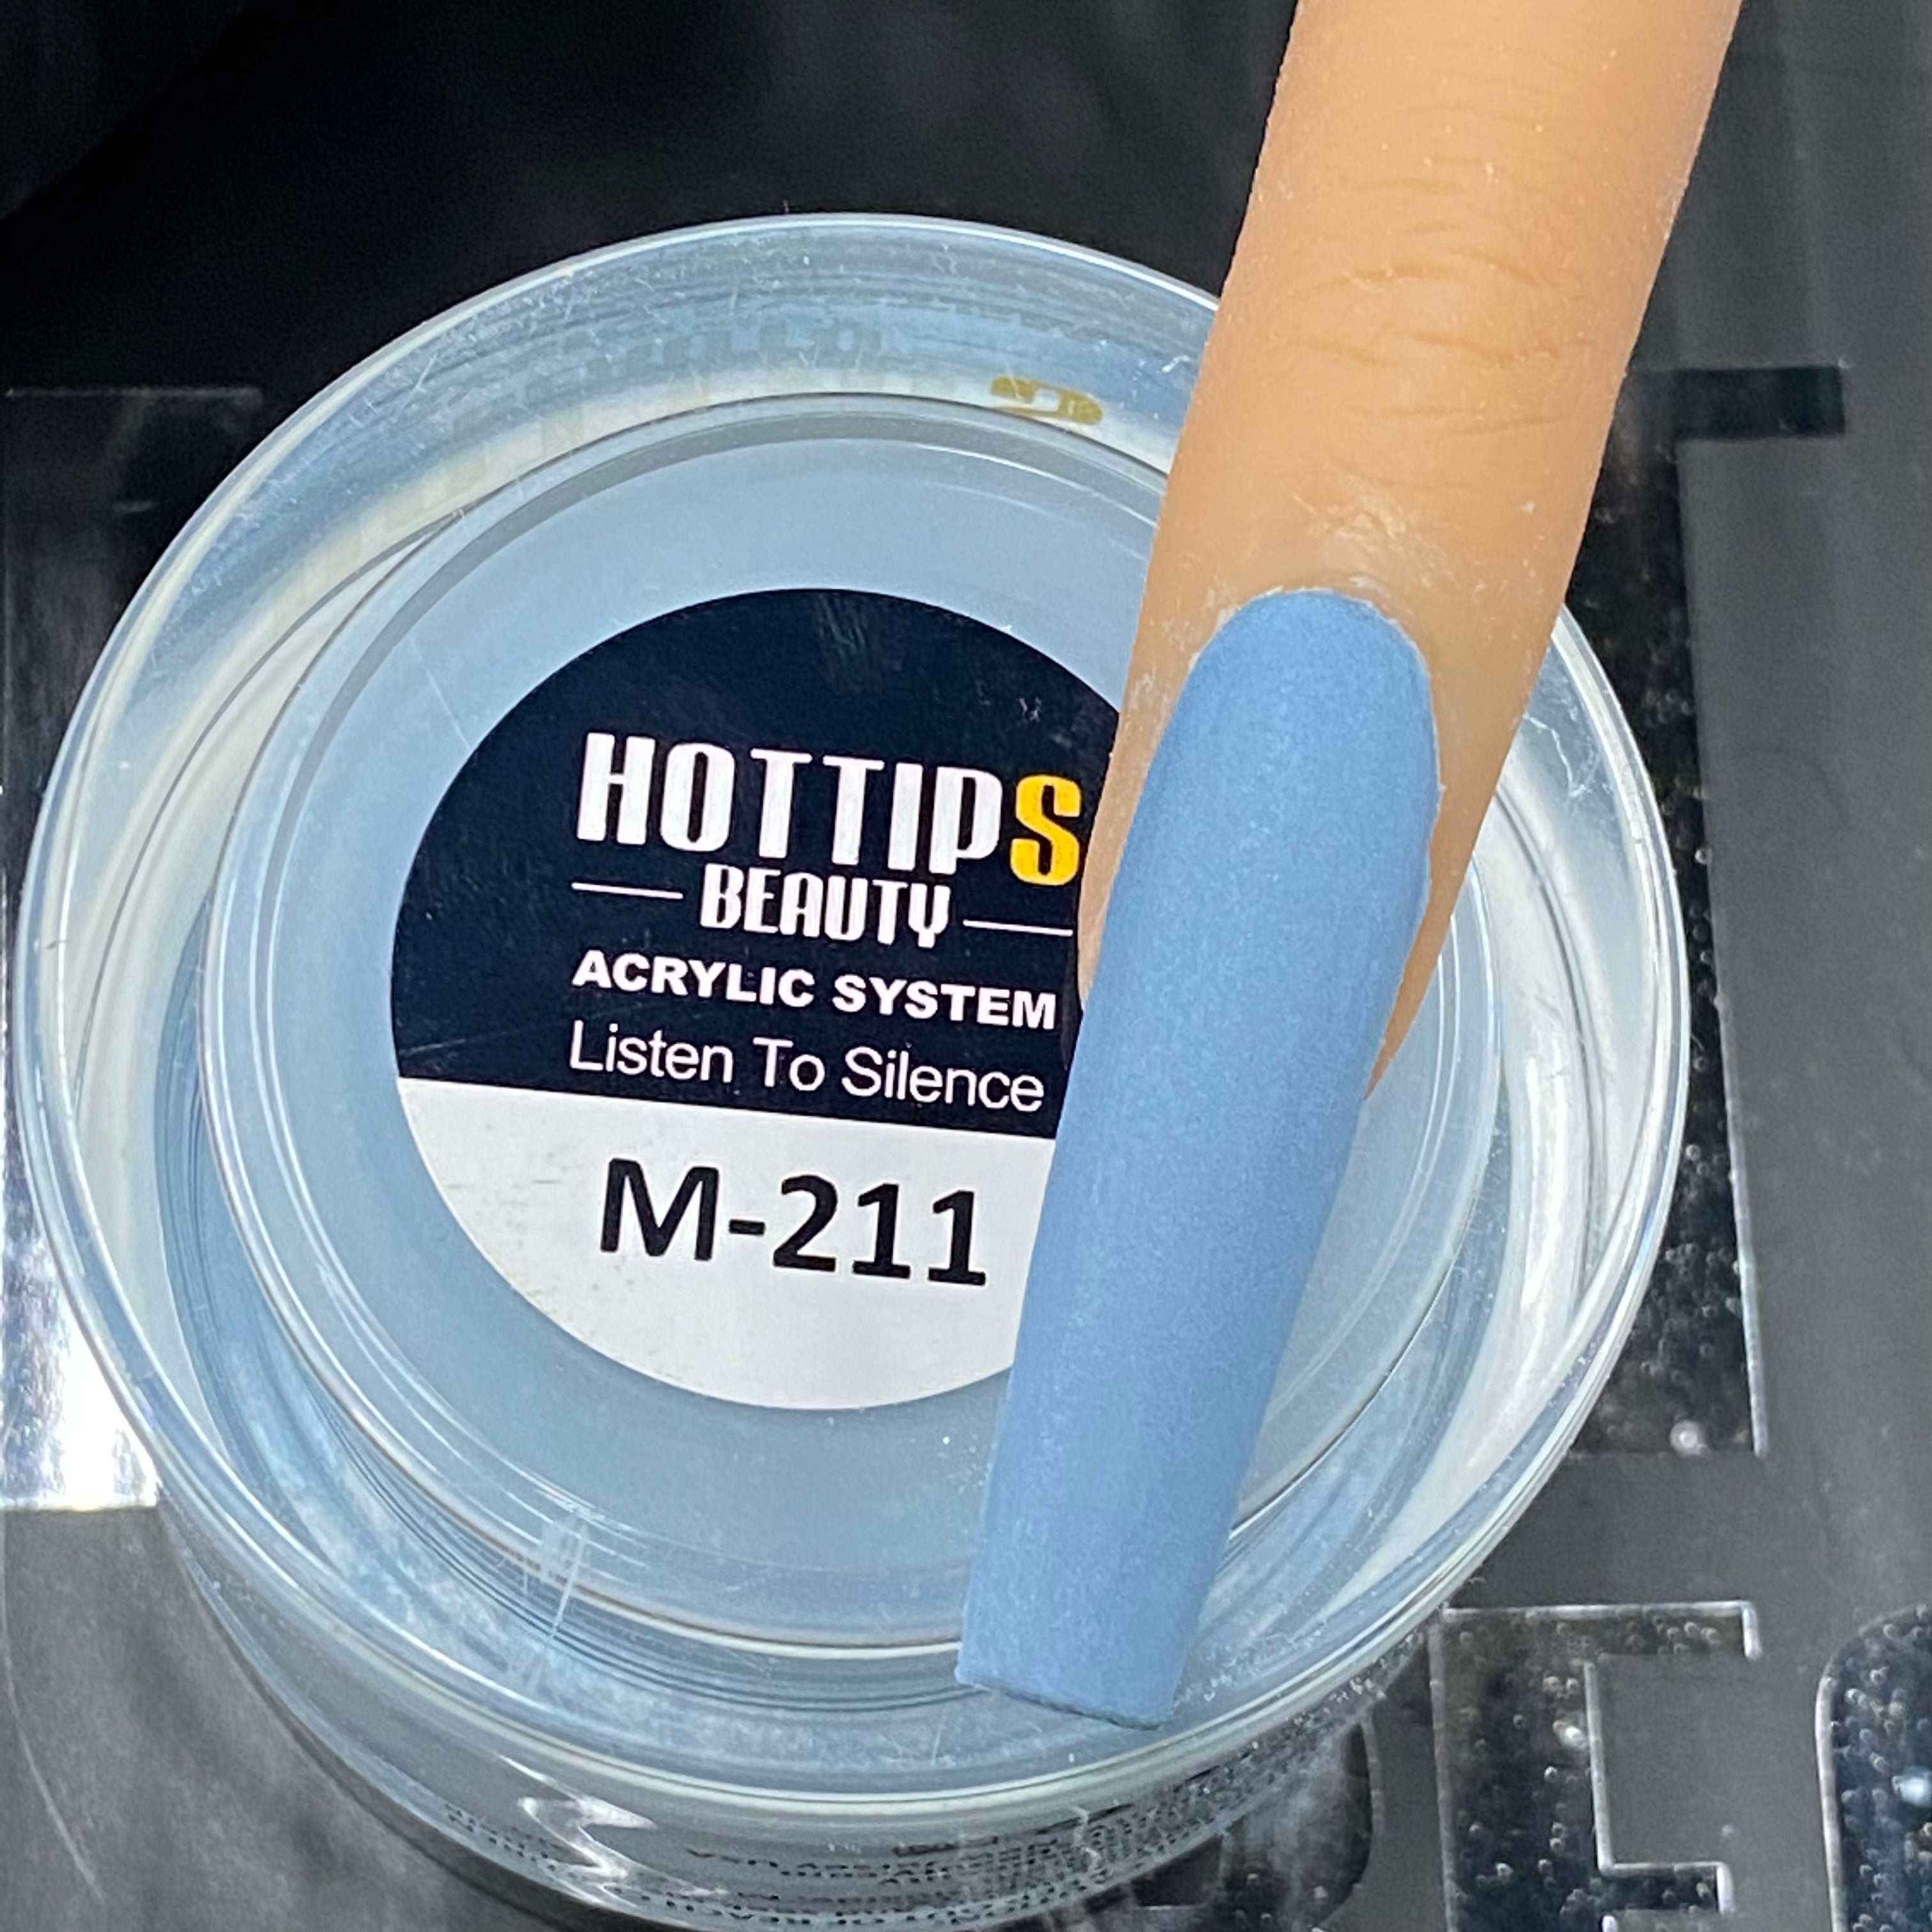 Acrylic Powder - M 211 Listen to Silience